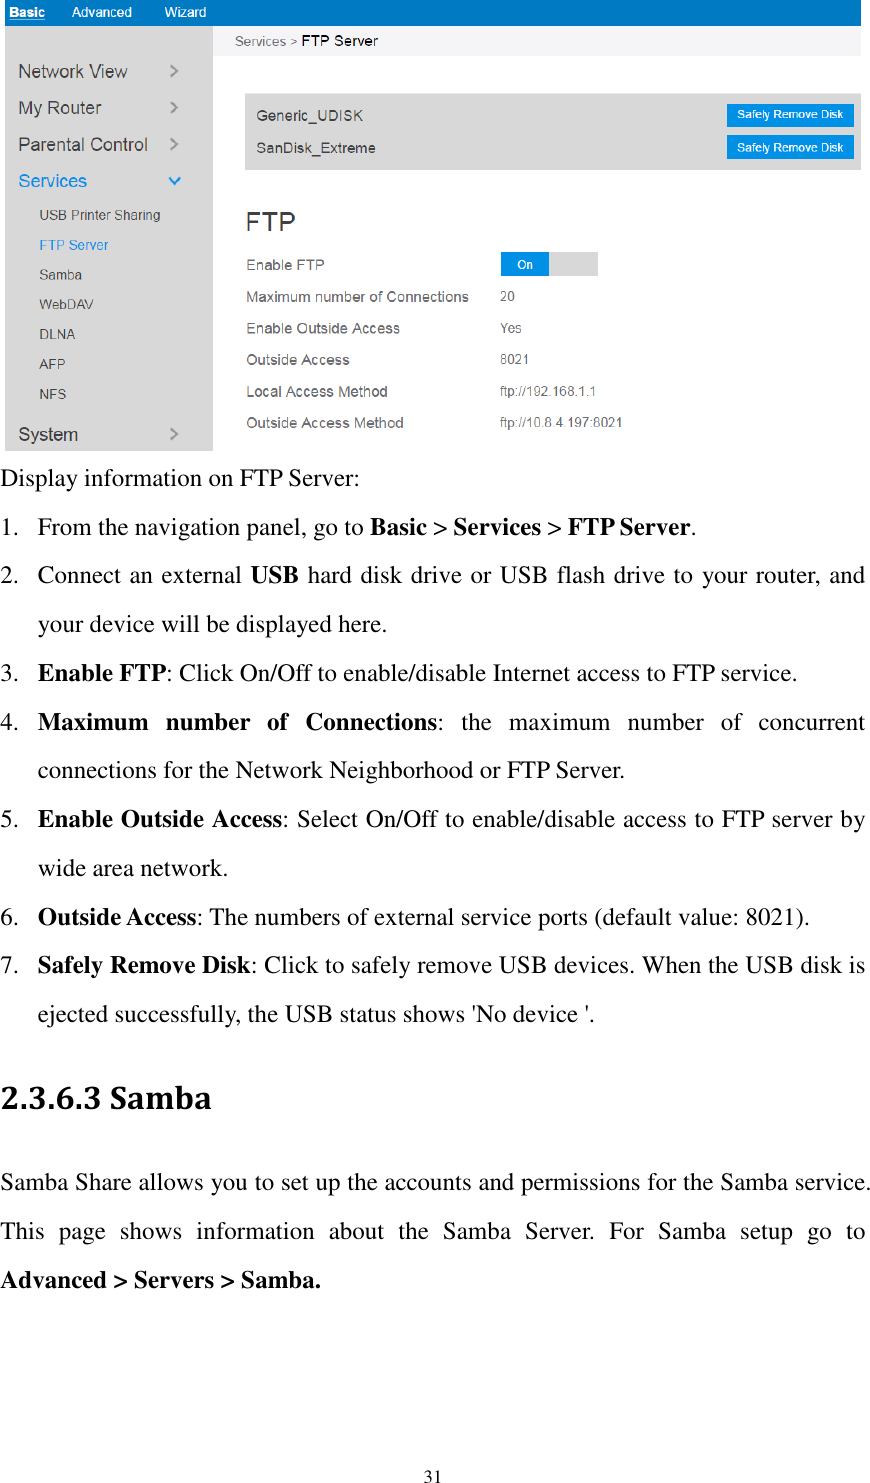  31  Display information on FTP Server: 1. From the navigation panel, go to Basic &gt; Services &gt; FTP Server. 2. Connect an external USB hard disk drive or USB flash drive to your router, and your device will be displayed here. 3. Enable FTP: Click On/Off to enable/disable Internet access to FTP service. 4. Maximum  number  of  Connections:  the  maximum  number  of  concurrent connections for the Network Neighborhood or FTP Server. 5. Enable Outside Access: Select On/Off to enable/disable access to FTP server by wide area network. 6. Outside Access: The numbers of external service ports (default value: 8021). 7. Safely Remove Disk: Click to safely remove USB devices. When the USB disk is ejected successfully, the USB status shows &apos;No device &apos;. 2.3.6.3 Samba   Samba Share allows you to set up the accounts and permissions for the Samba service. This  page  shows  information  about  the  Samba  Server.  For  Samba  setup  go  to Advanced &gt; Servers &gt; Samba.  